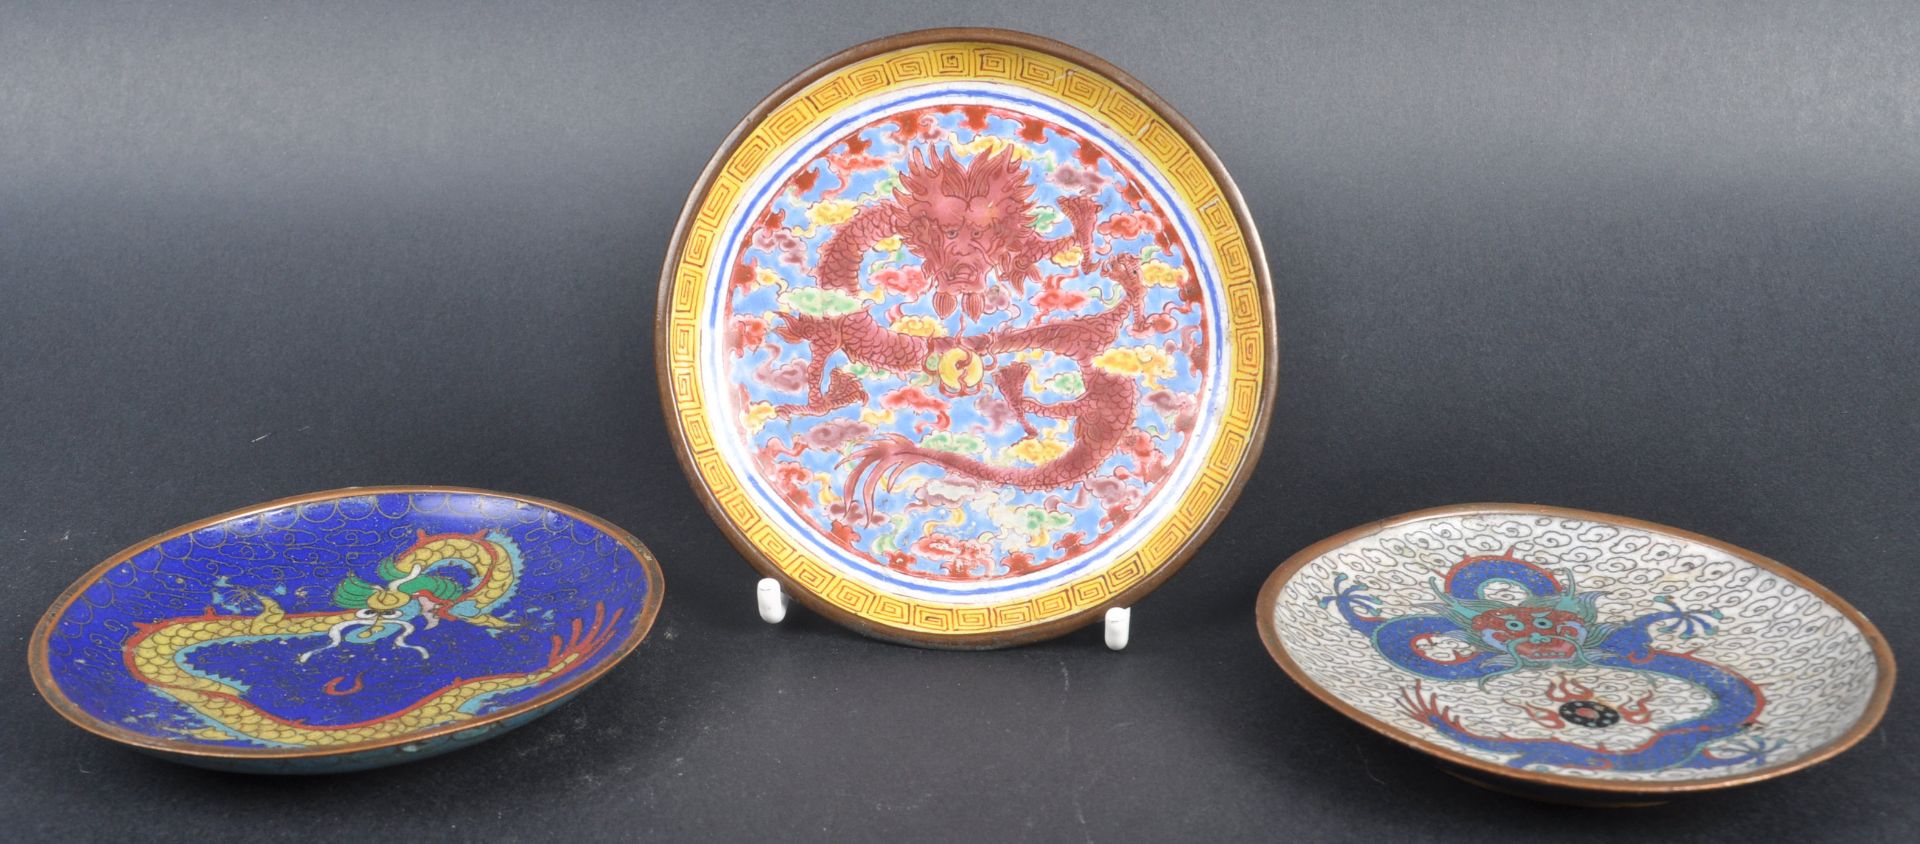 COLLECTION OF CHINESE CLOISONNE DRAGON PLATES